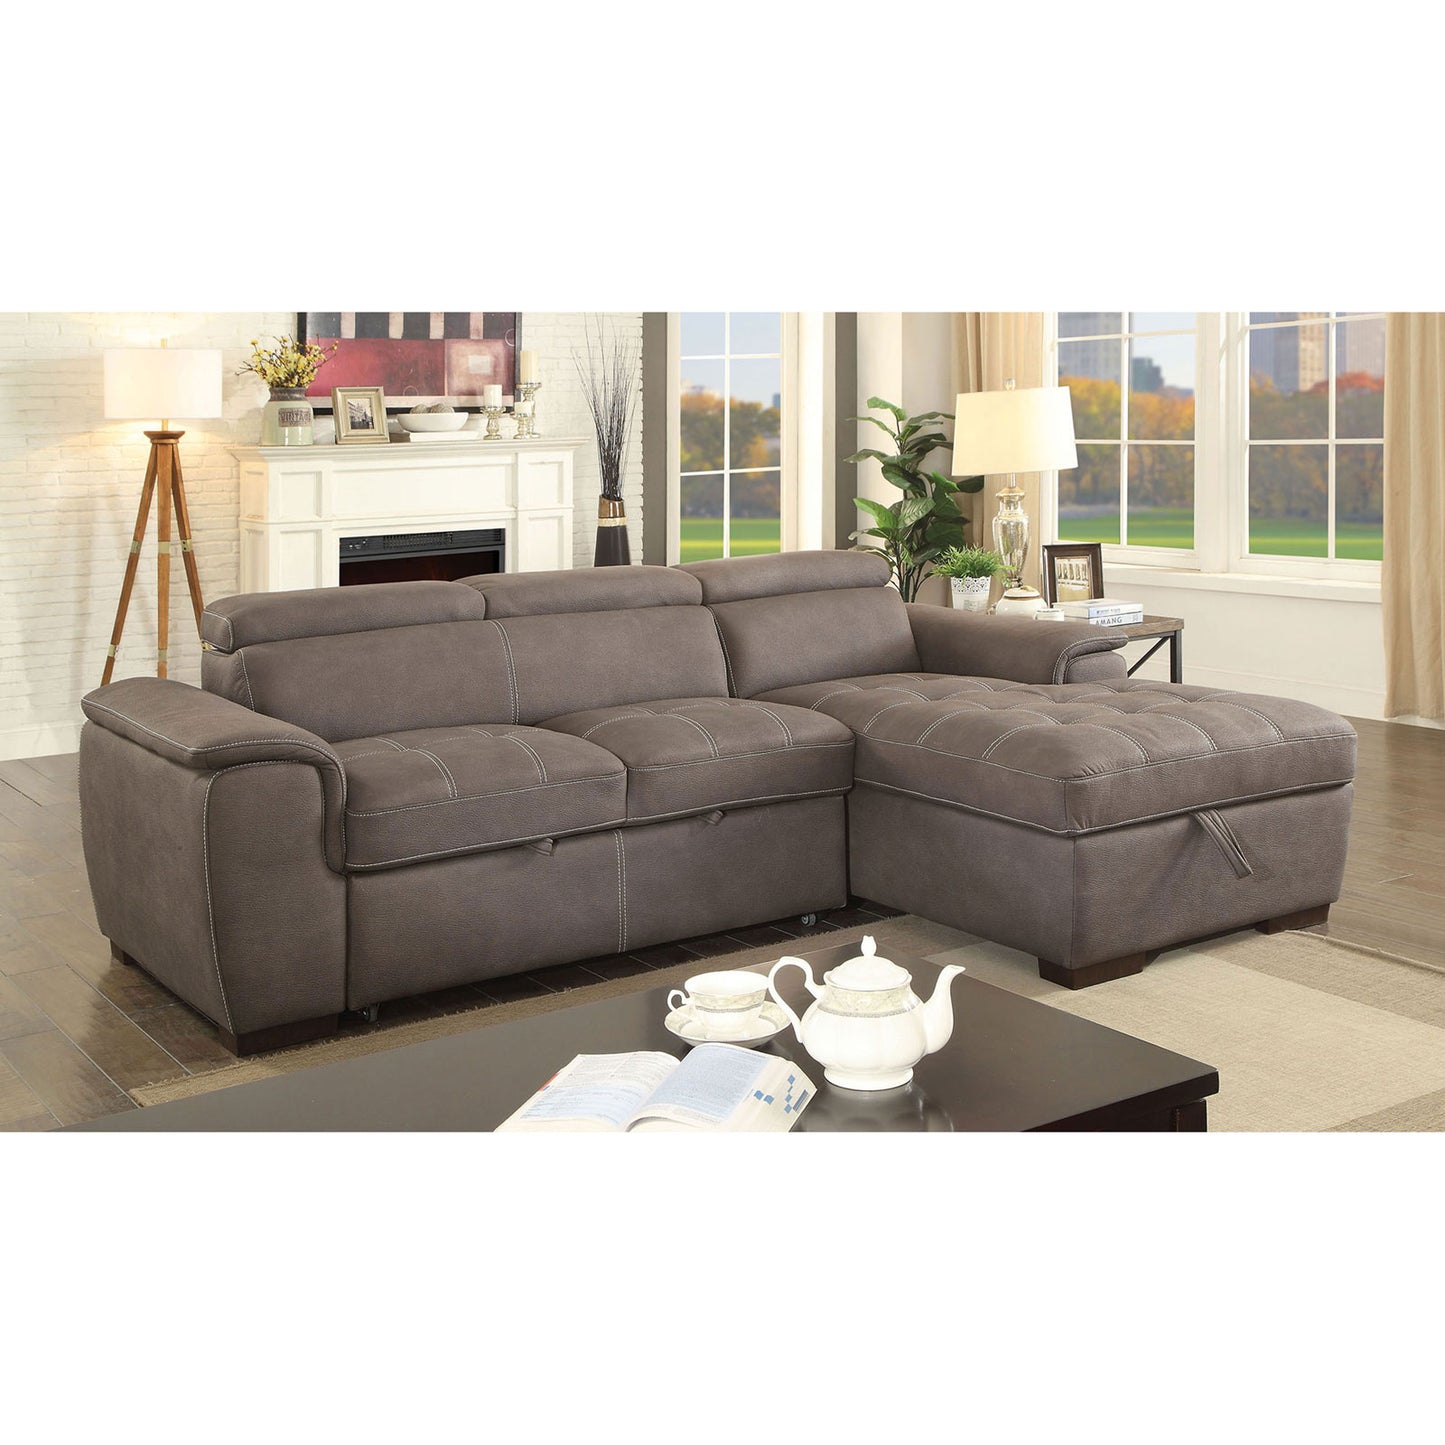 Furniture of America Patty Ash Brown Sectional, Ash Brown